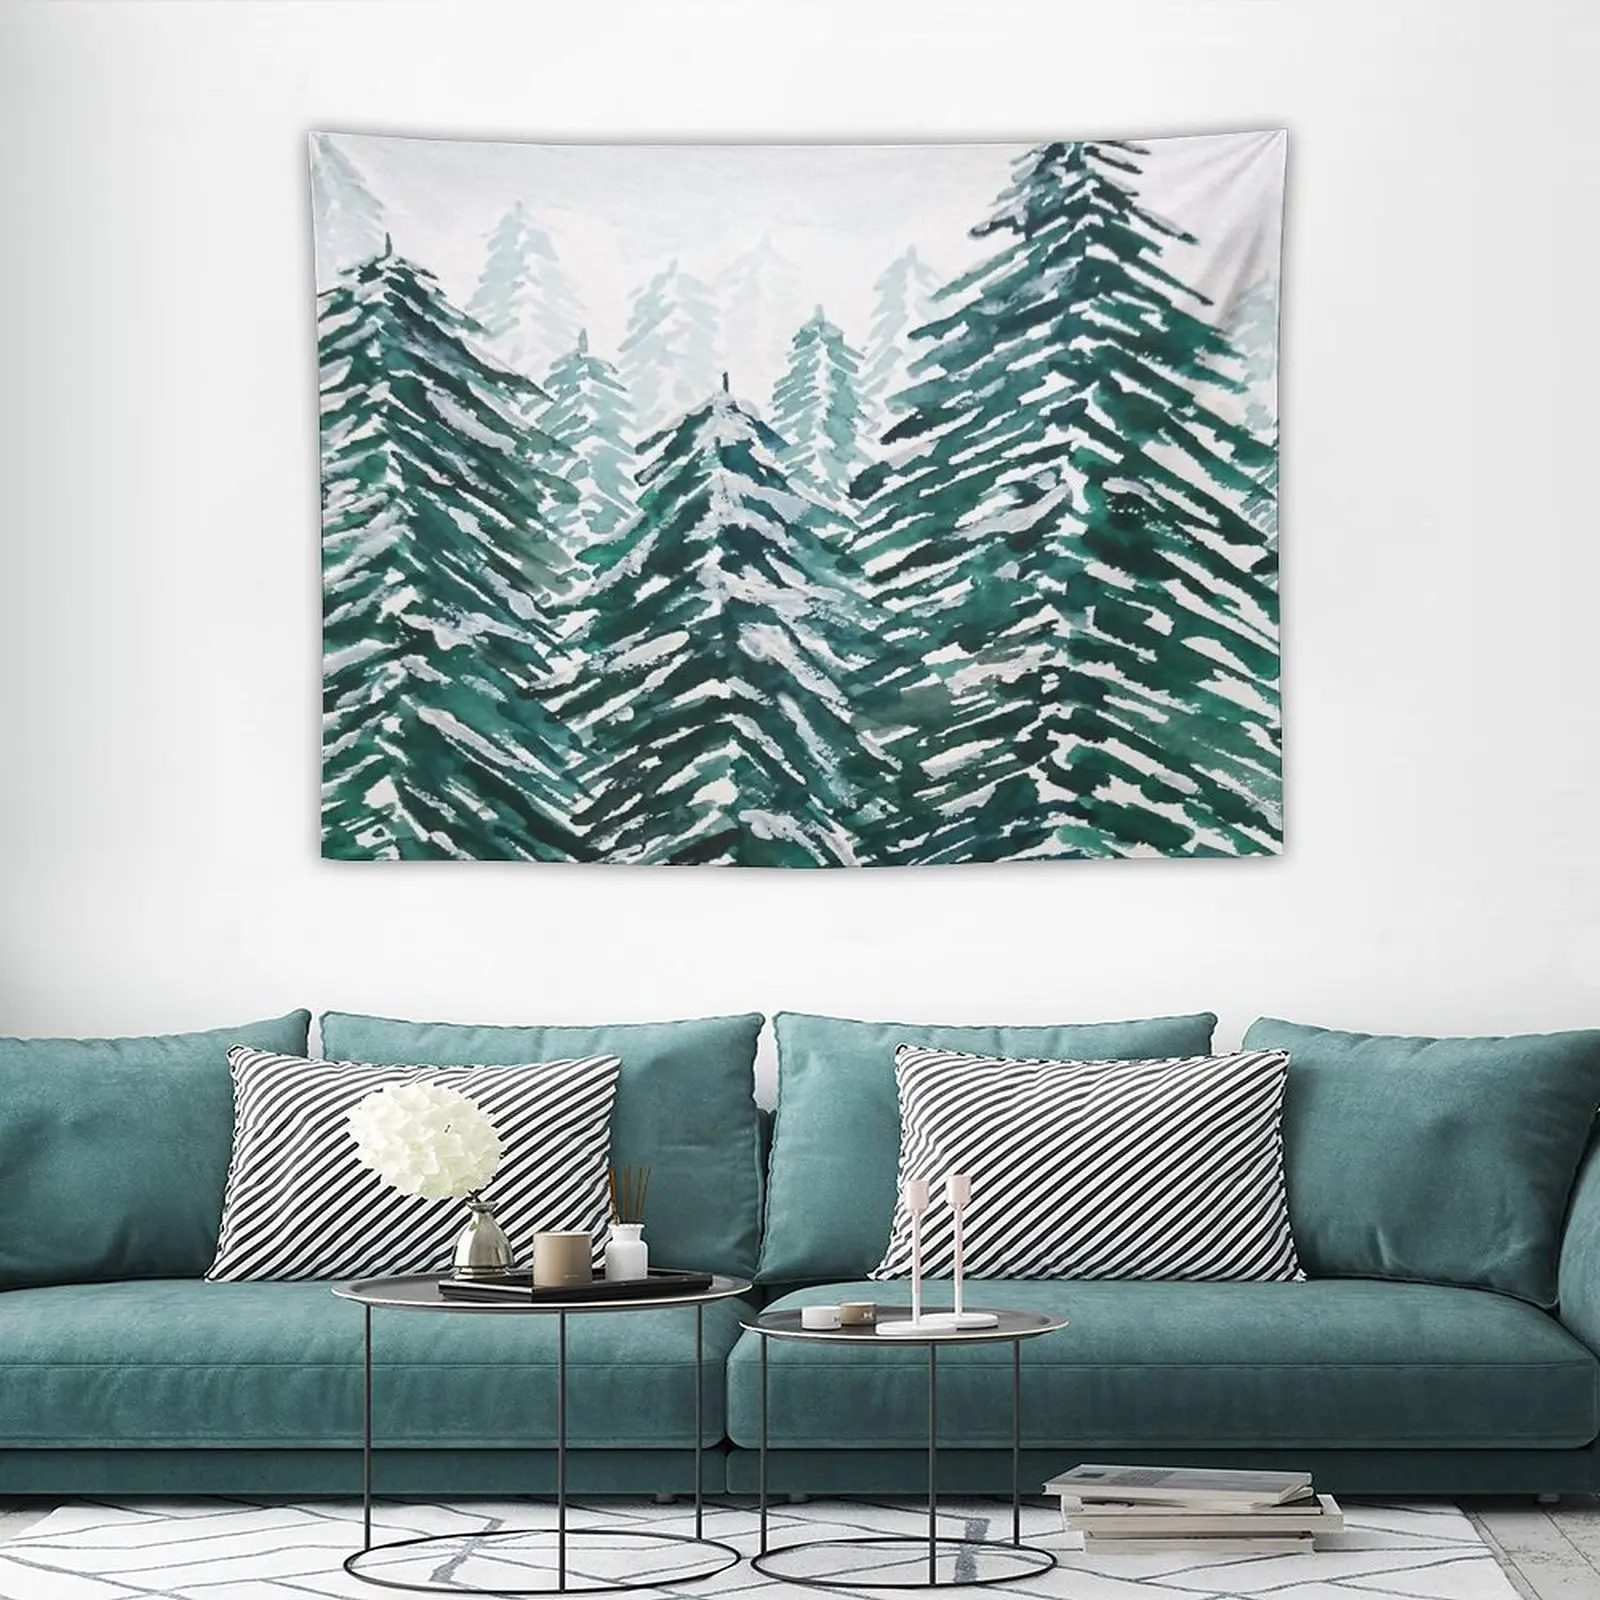 

Room Decoration Aesthetic Kawaii Snowy Pine Forest Green Tapestry Esotericism Bohemian Deco Boho Home Decor